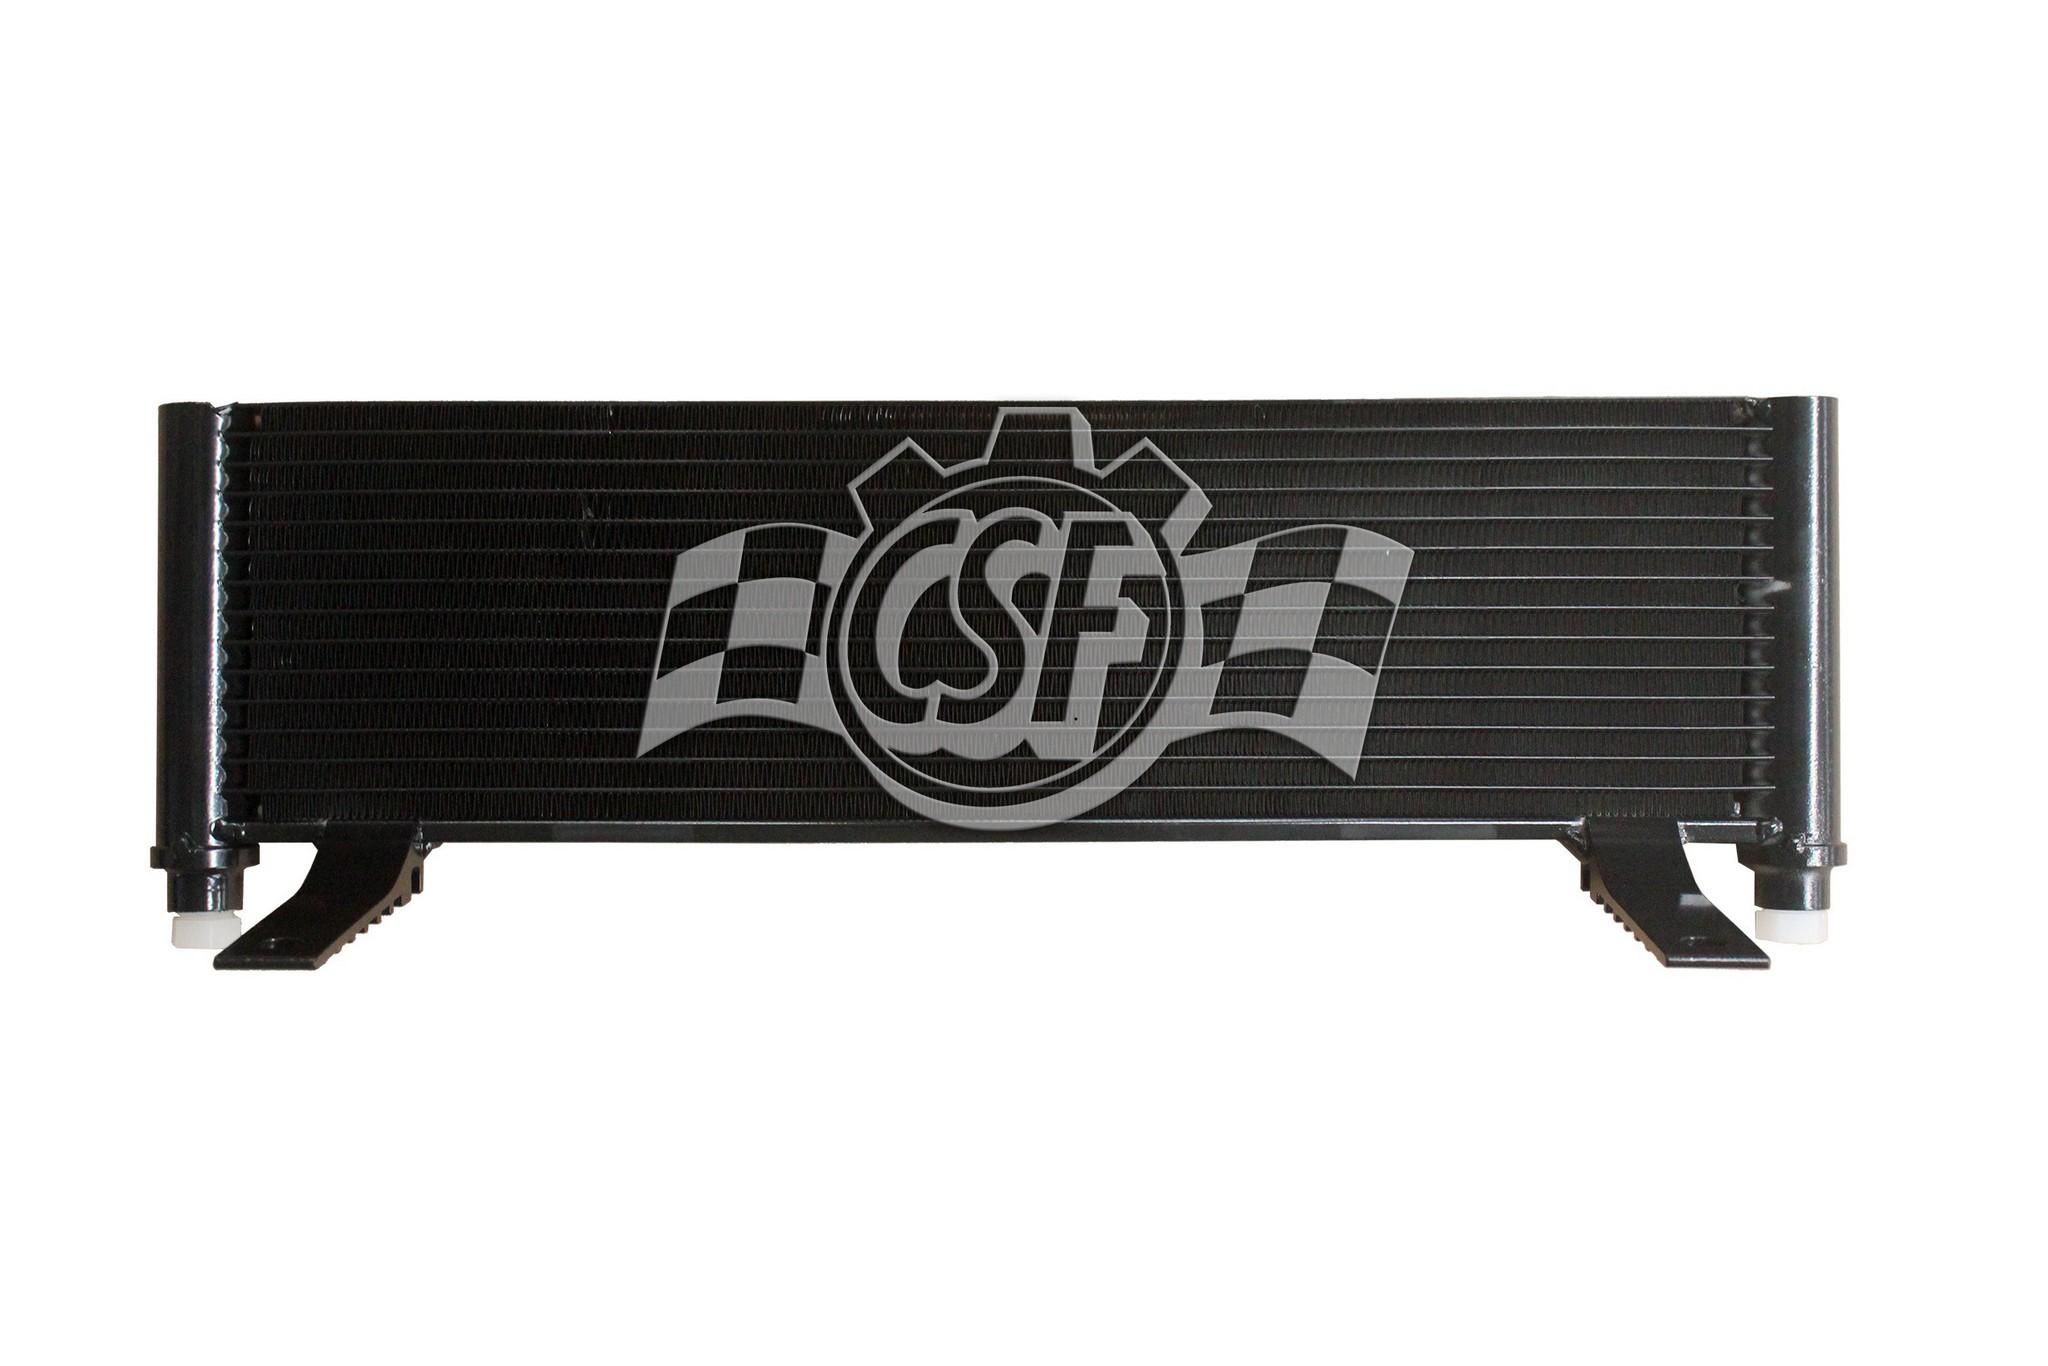 CSF 20014 Automatic Transmission Oil Cooler